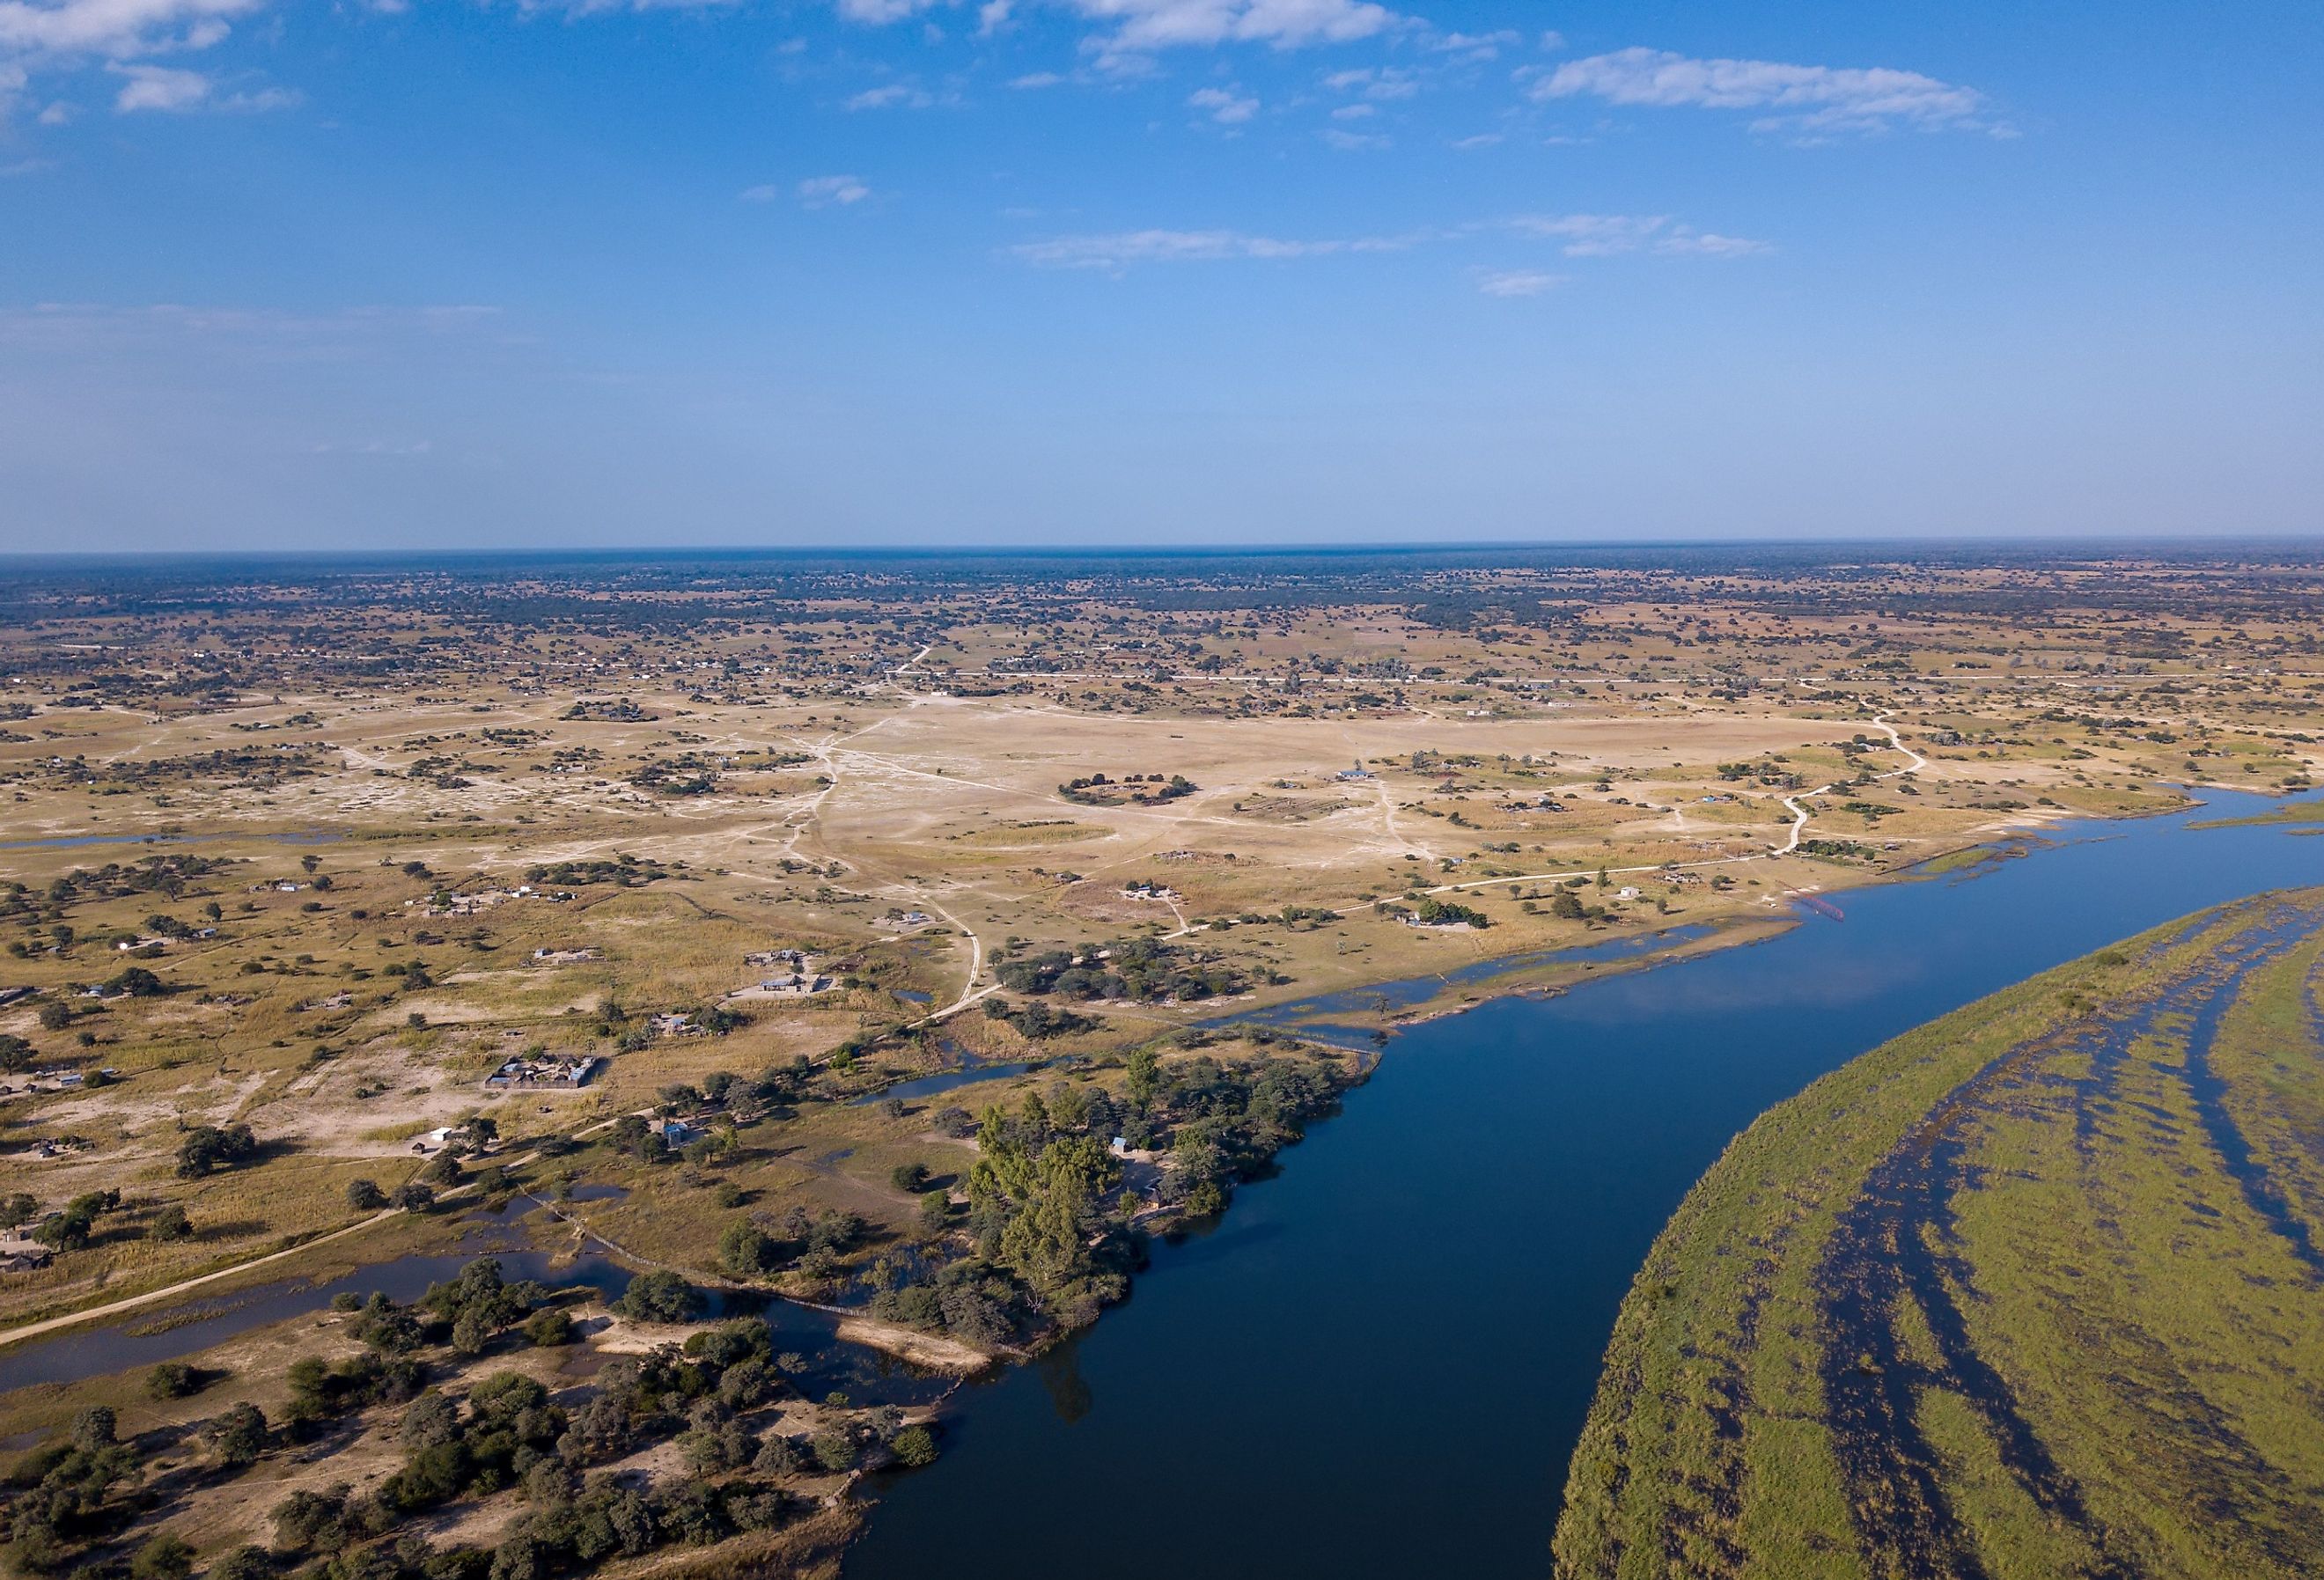 Aerial landscape in Okavango delta on Namibia and Angola border. River with shore and green vegetation after rainy season. Image credit Artush via Shutterstock. 